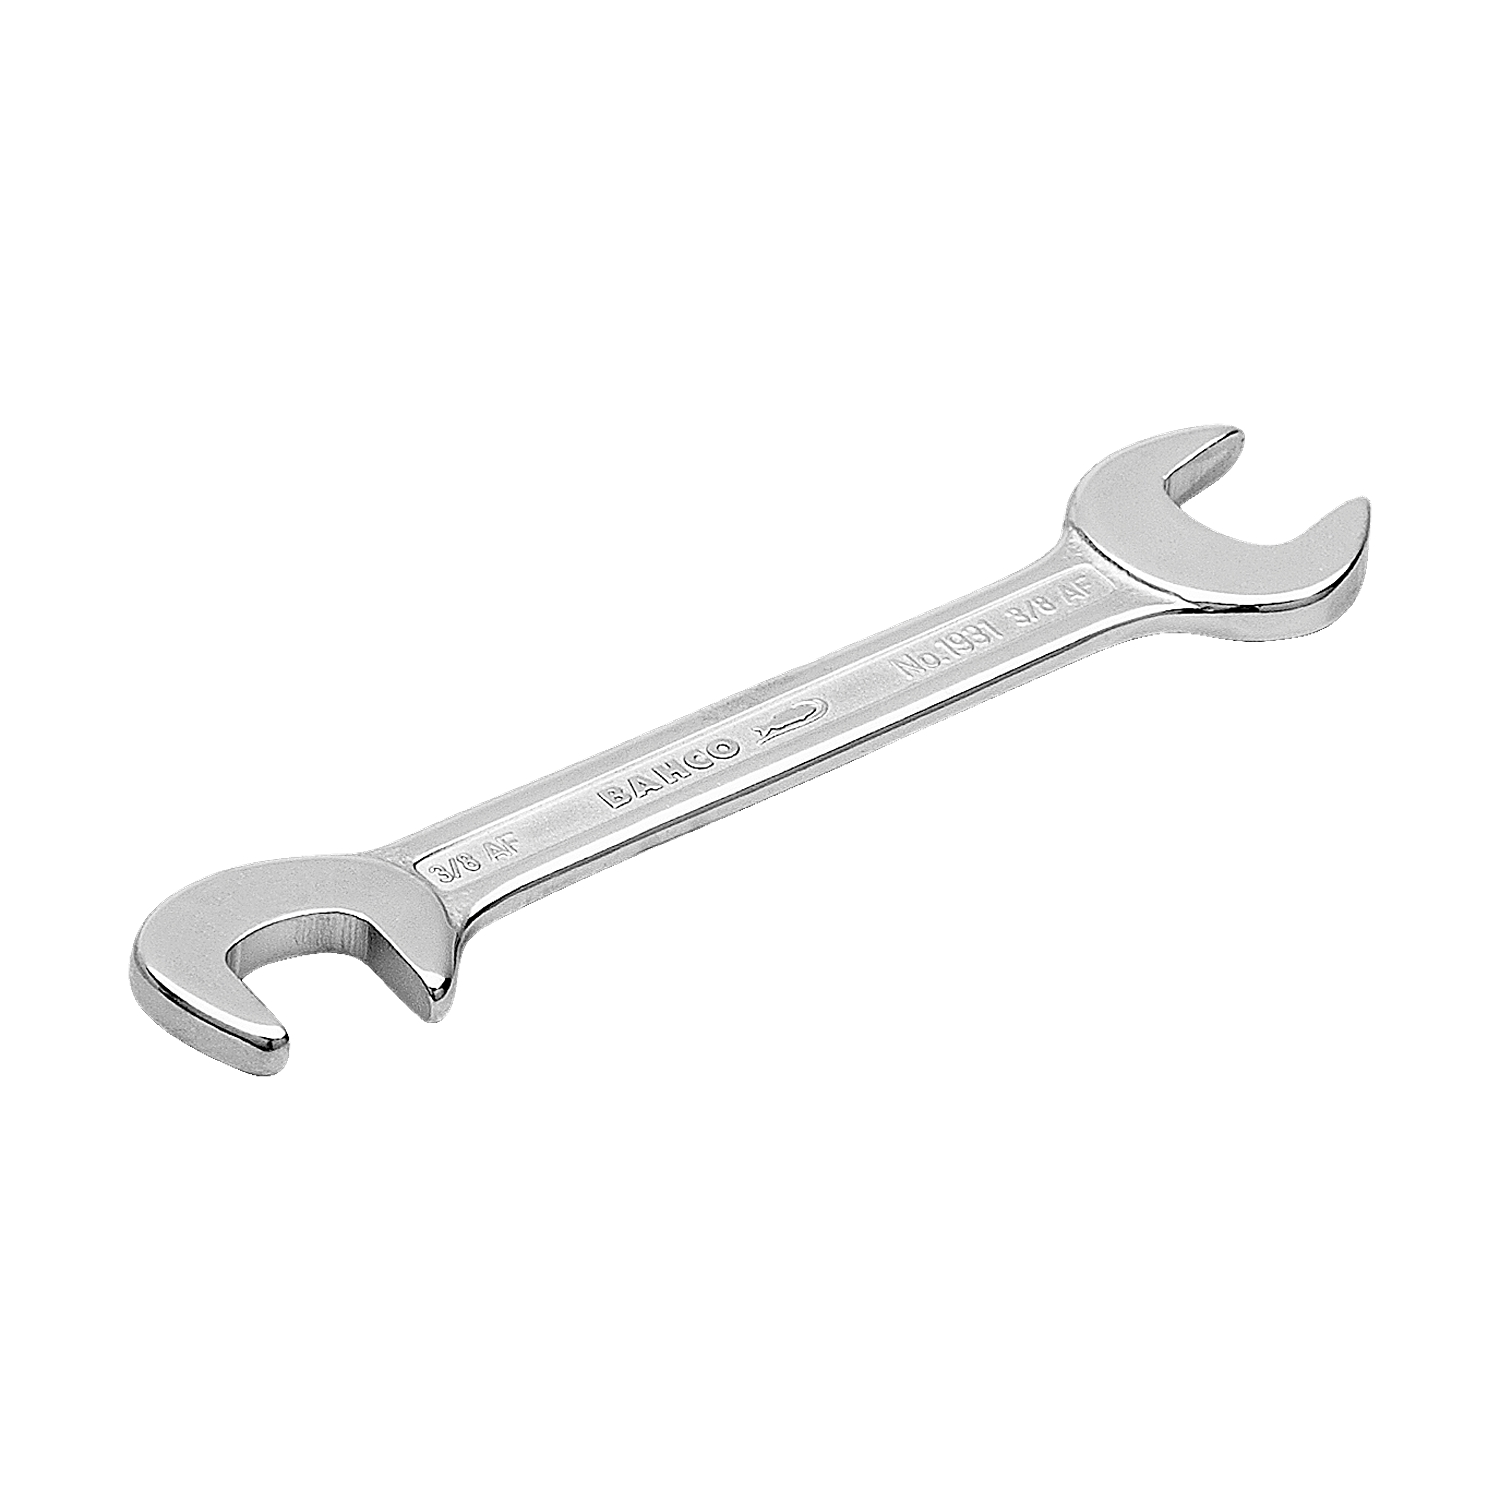 BAHCO 1931M Metric Lilliput Double Open Ended Wrench Chrome - Premium Double Open Ended Wrench from BAHCO - Shop now at Yew Aik.